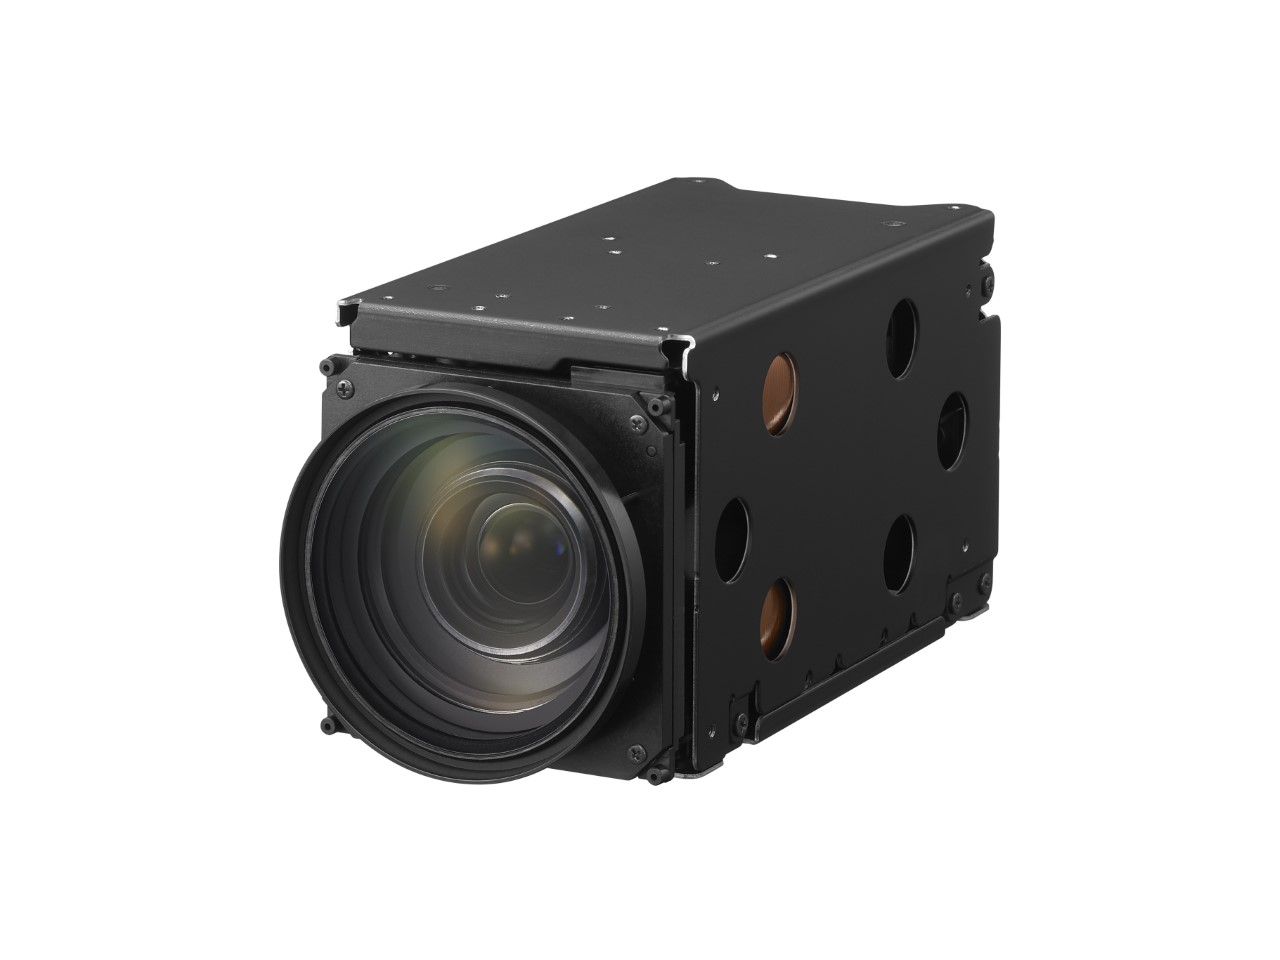 With compact dimensions the EV9500 Series camera blocks can be incorporated into space-constrained application settings.